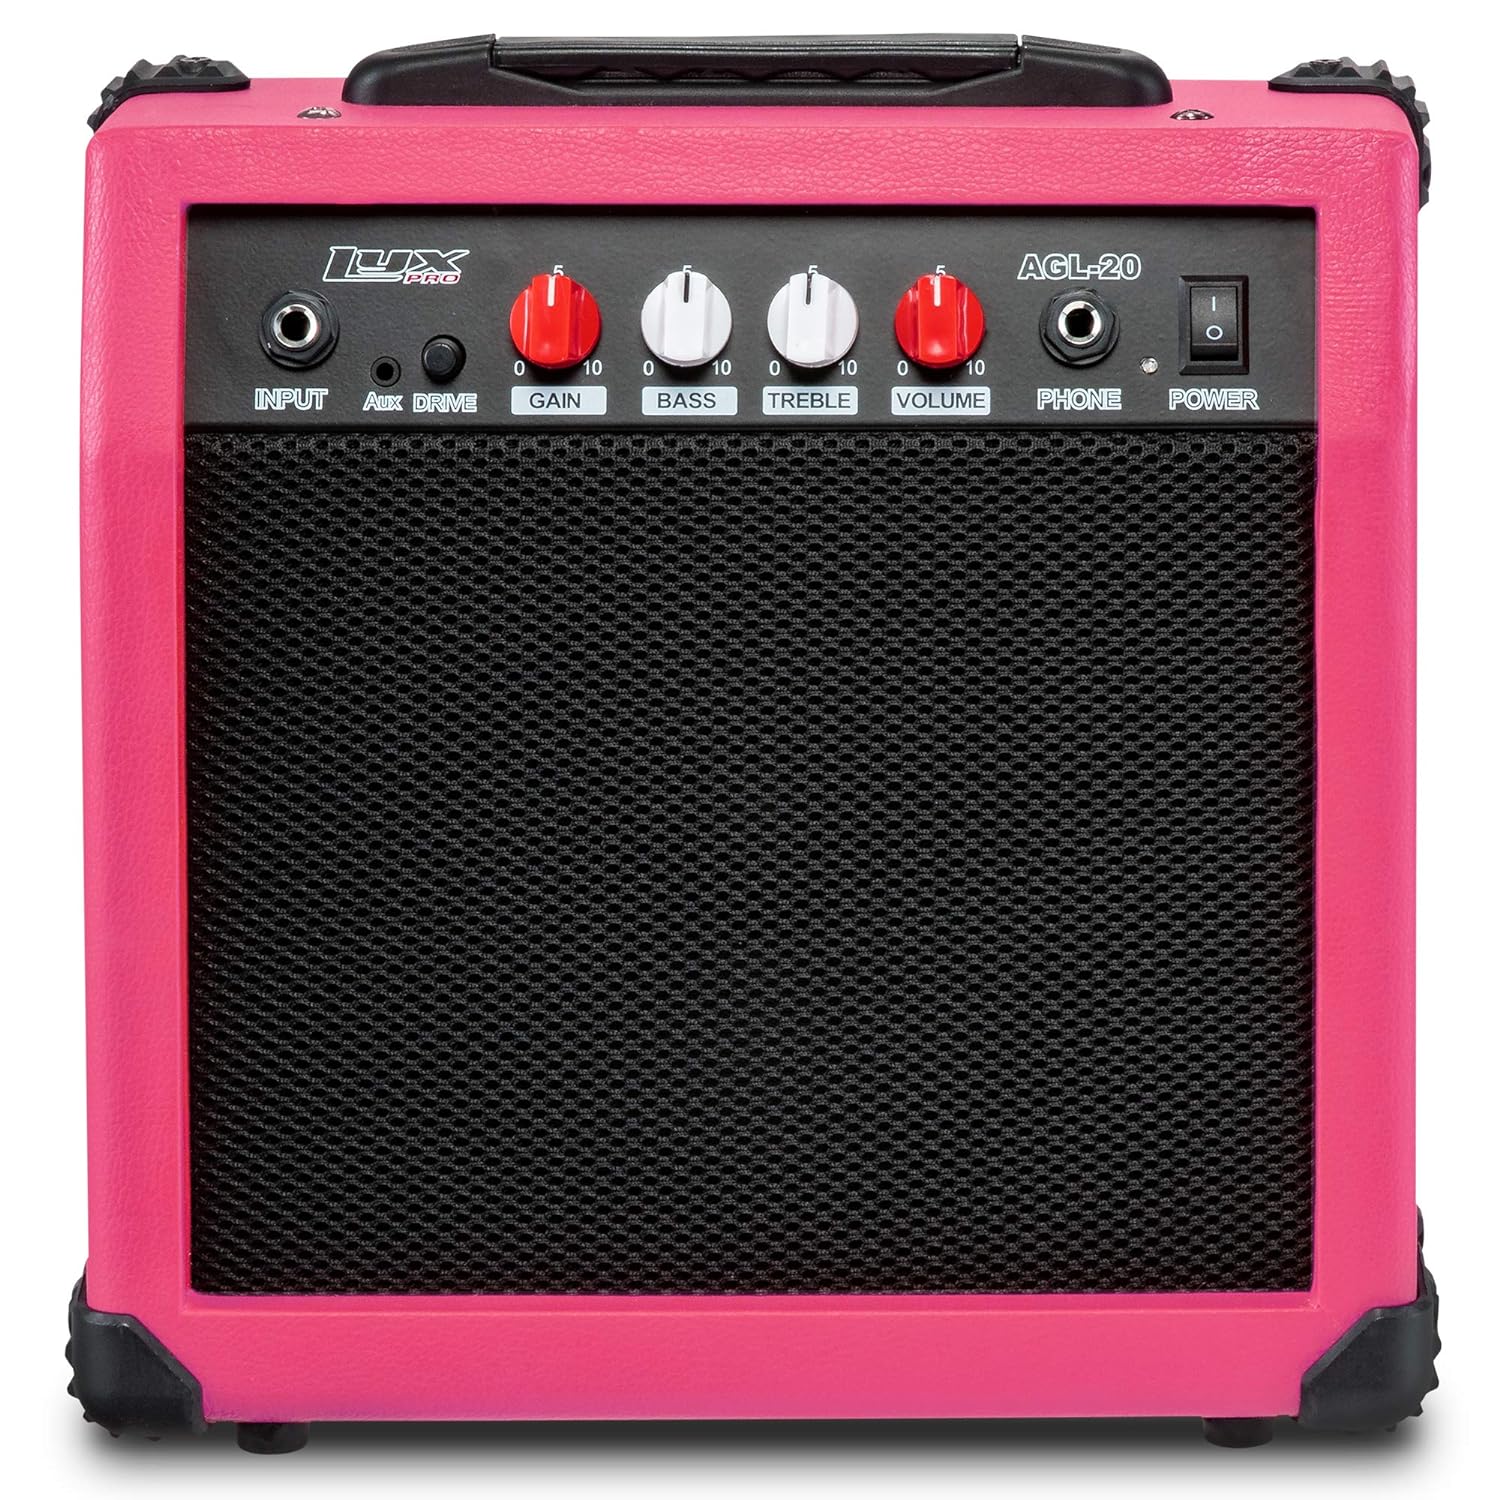 LyxPro Electric Guitar Amp 20 Watt Amplifier Built In Speaker Headphone Jack And Aux Input Includes Gain Bass Treble Volume And Grind - Pink